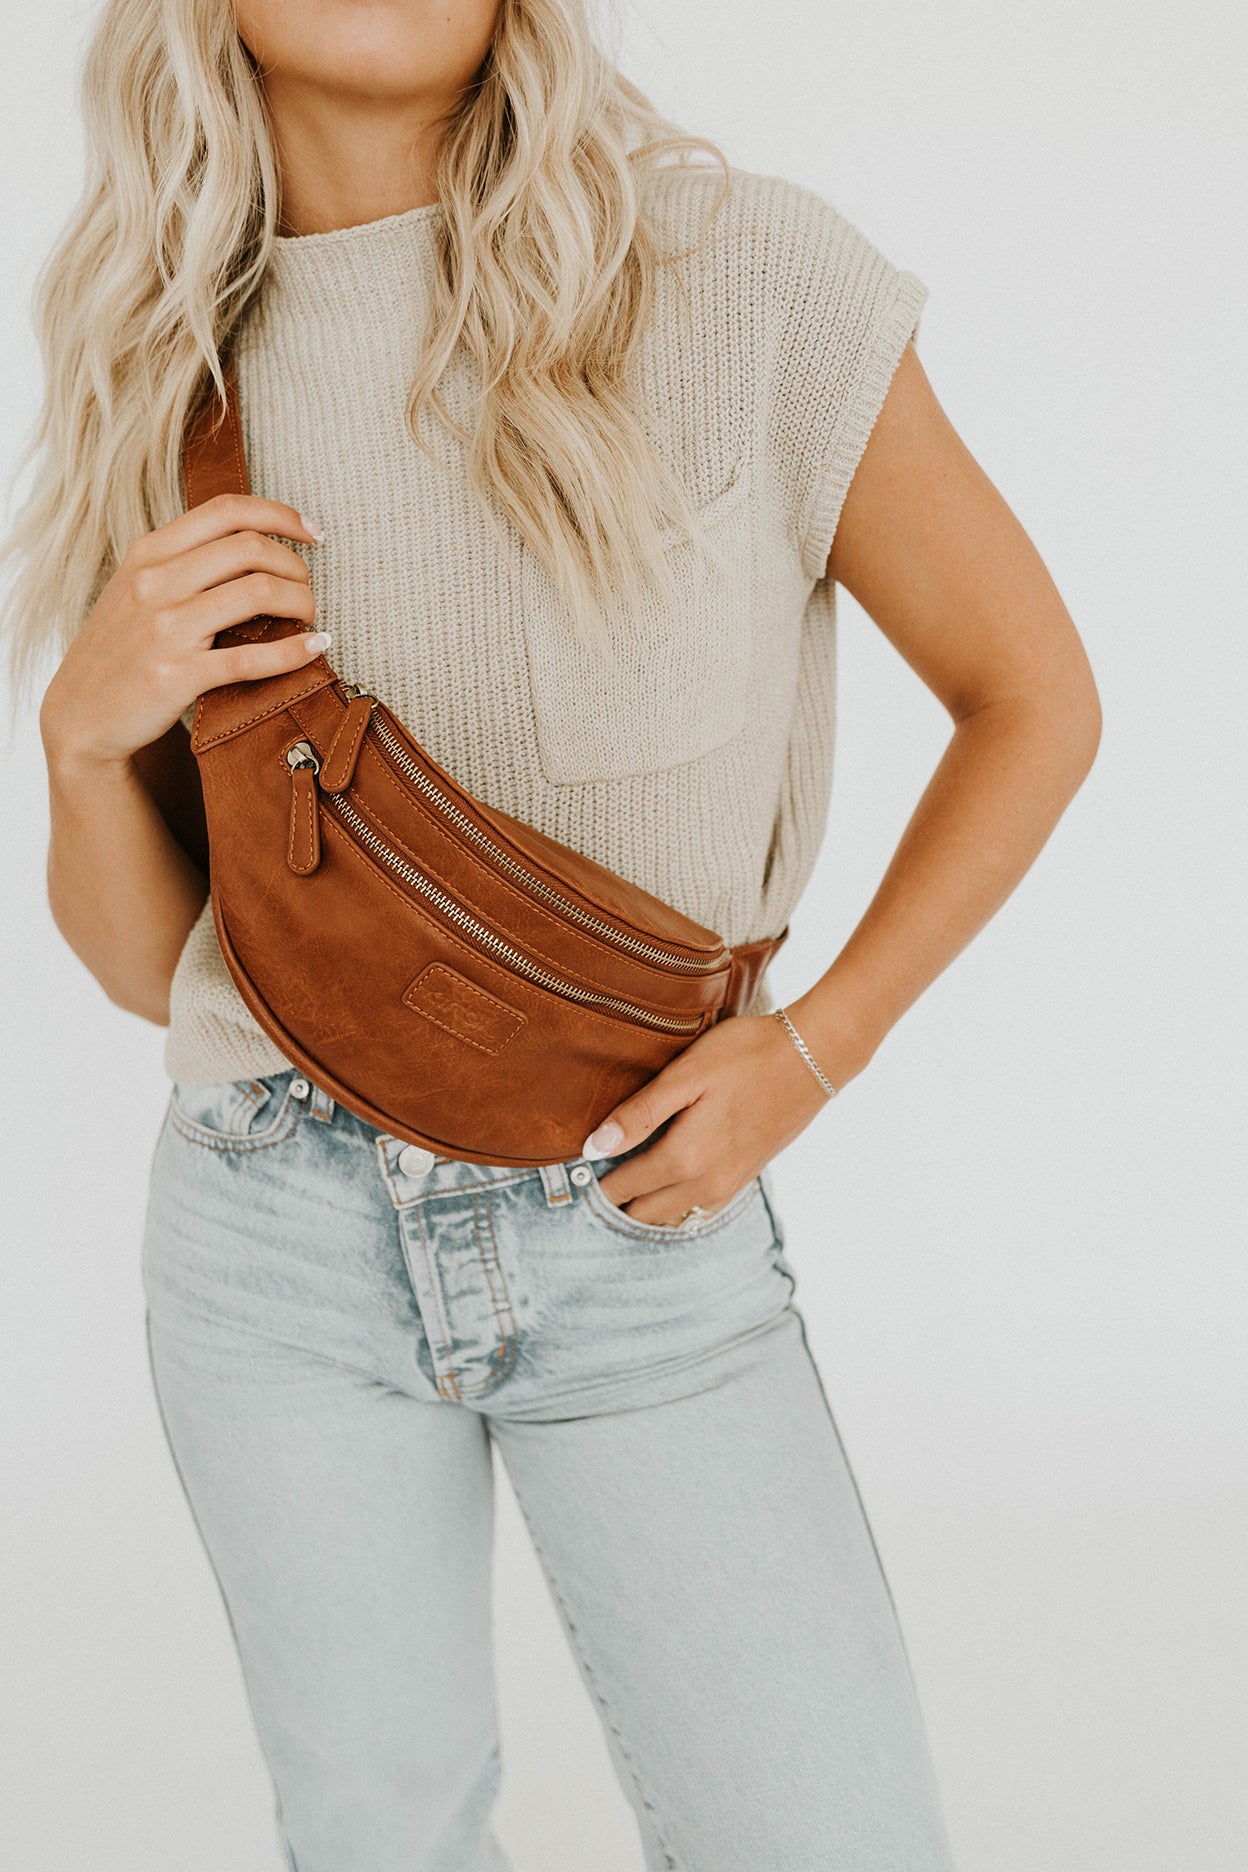 absolutte Grand bagage The Photographer's Fanny Pack (PRE-ORDER- SHIPS IN SEPTEMBER) –  kindlycamerabags